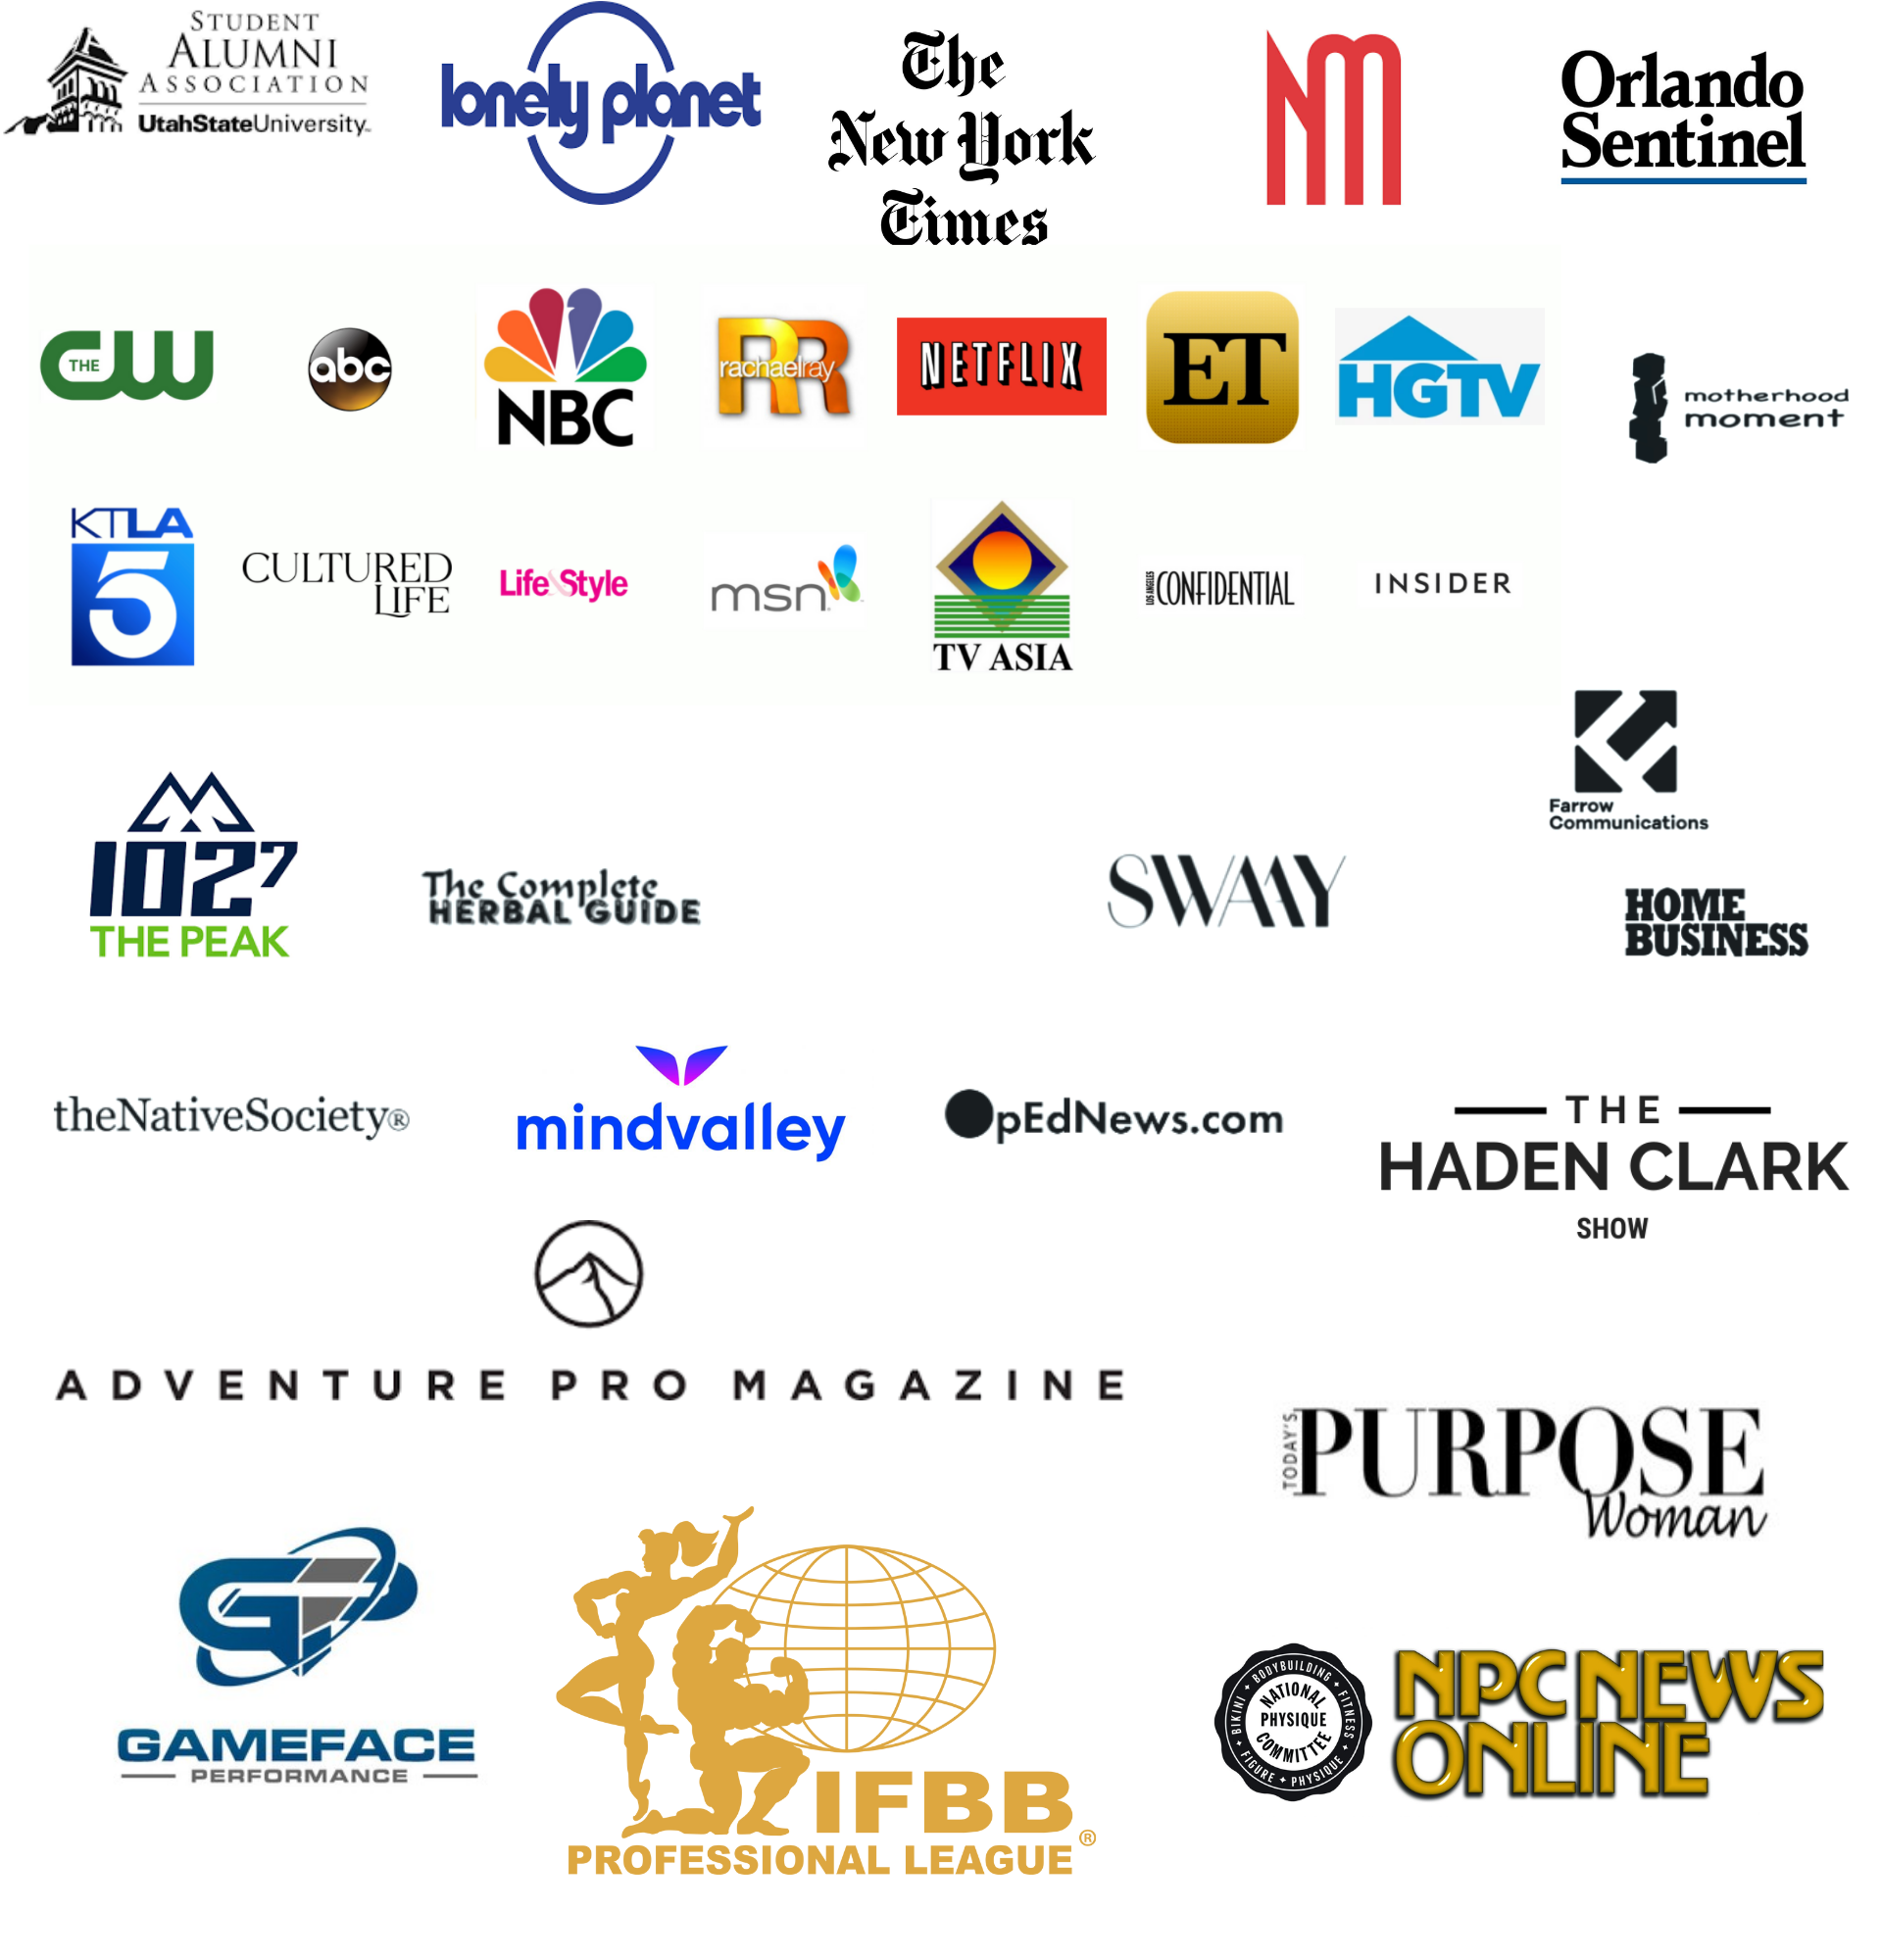 Speakers have been featured in major media outlets such as The New York Times, HGTV, Netflix, NBC, ABC, and many more